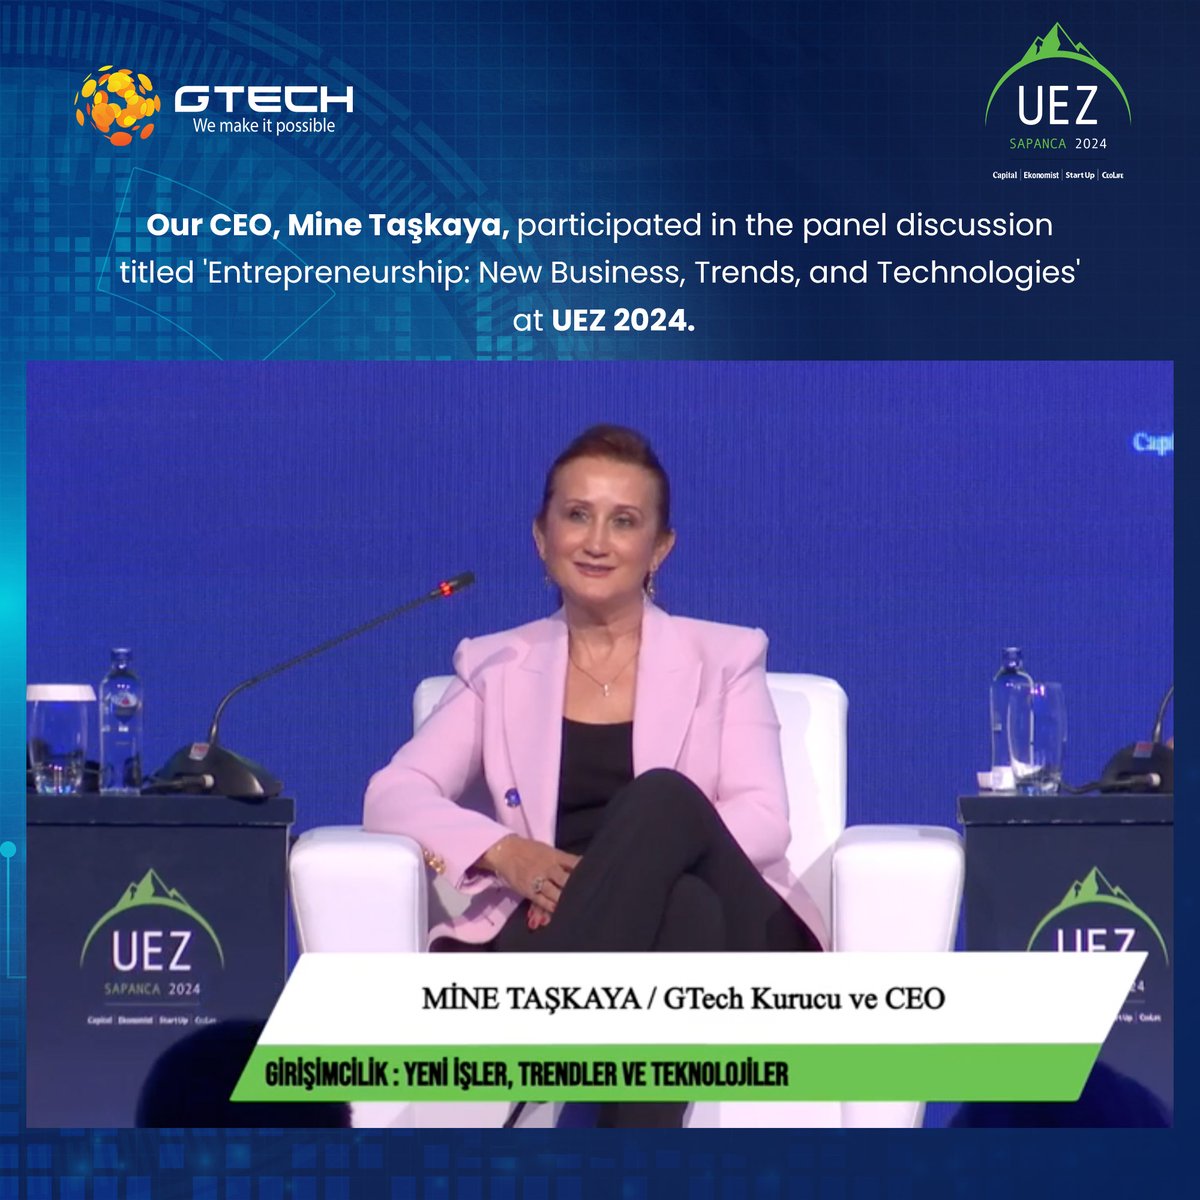 Our CEO, Mine Taşkaya, participated in the panel discussion titled 'Entrepreneurship: New Business, Trends, and Technologies' at UEZ 2024.
#UEZ2024 #Entrepreneurship #GTech #Technology #Innovation